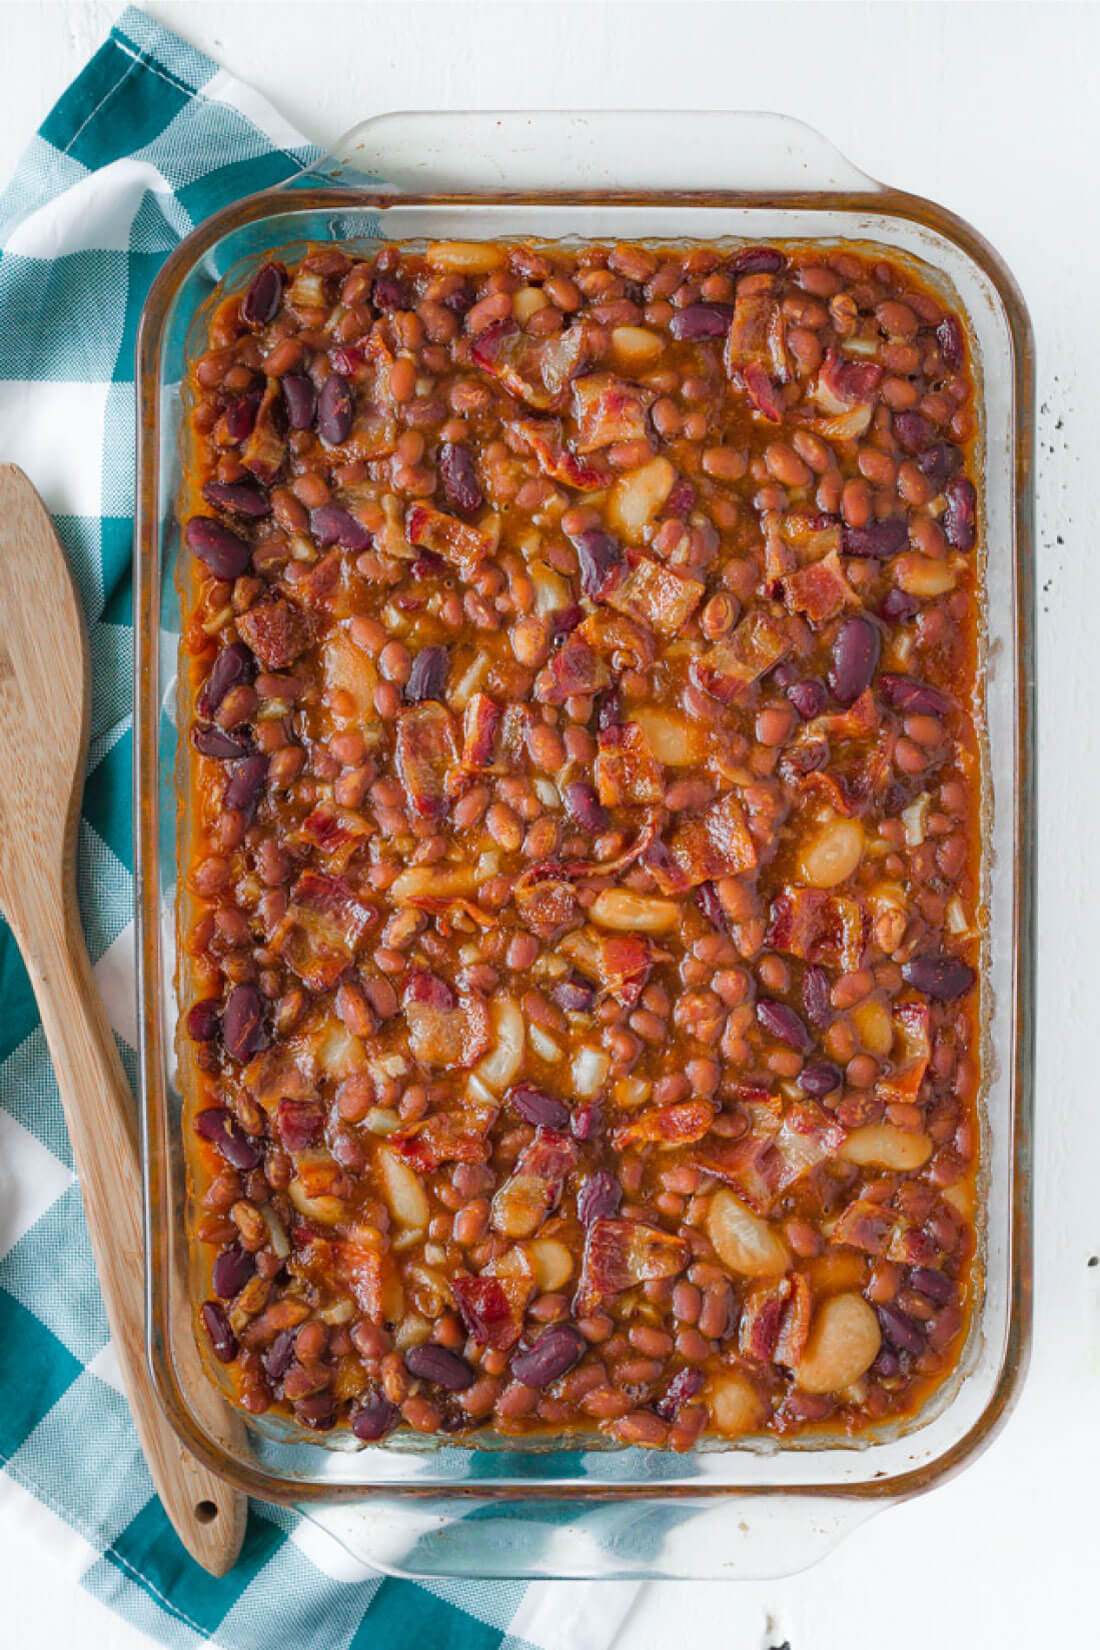 Delicious Baked Beans recipe - perfect for a summer barbecue! Full pan 